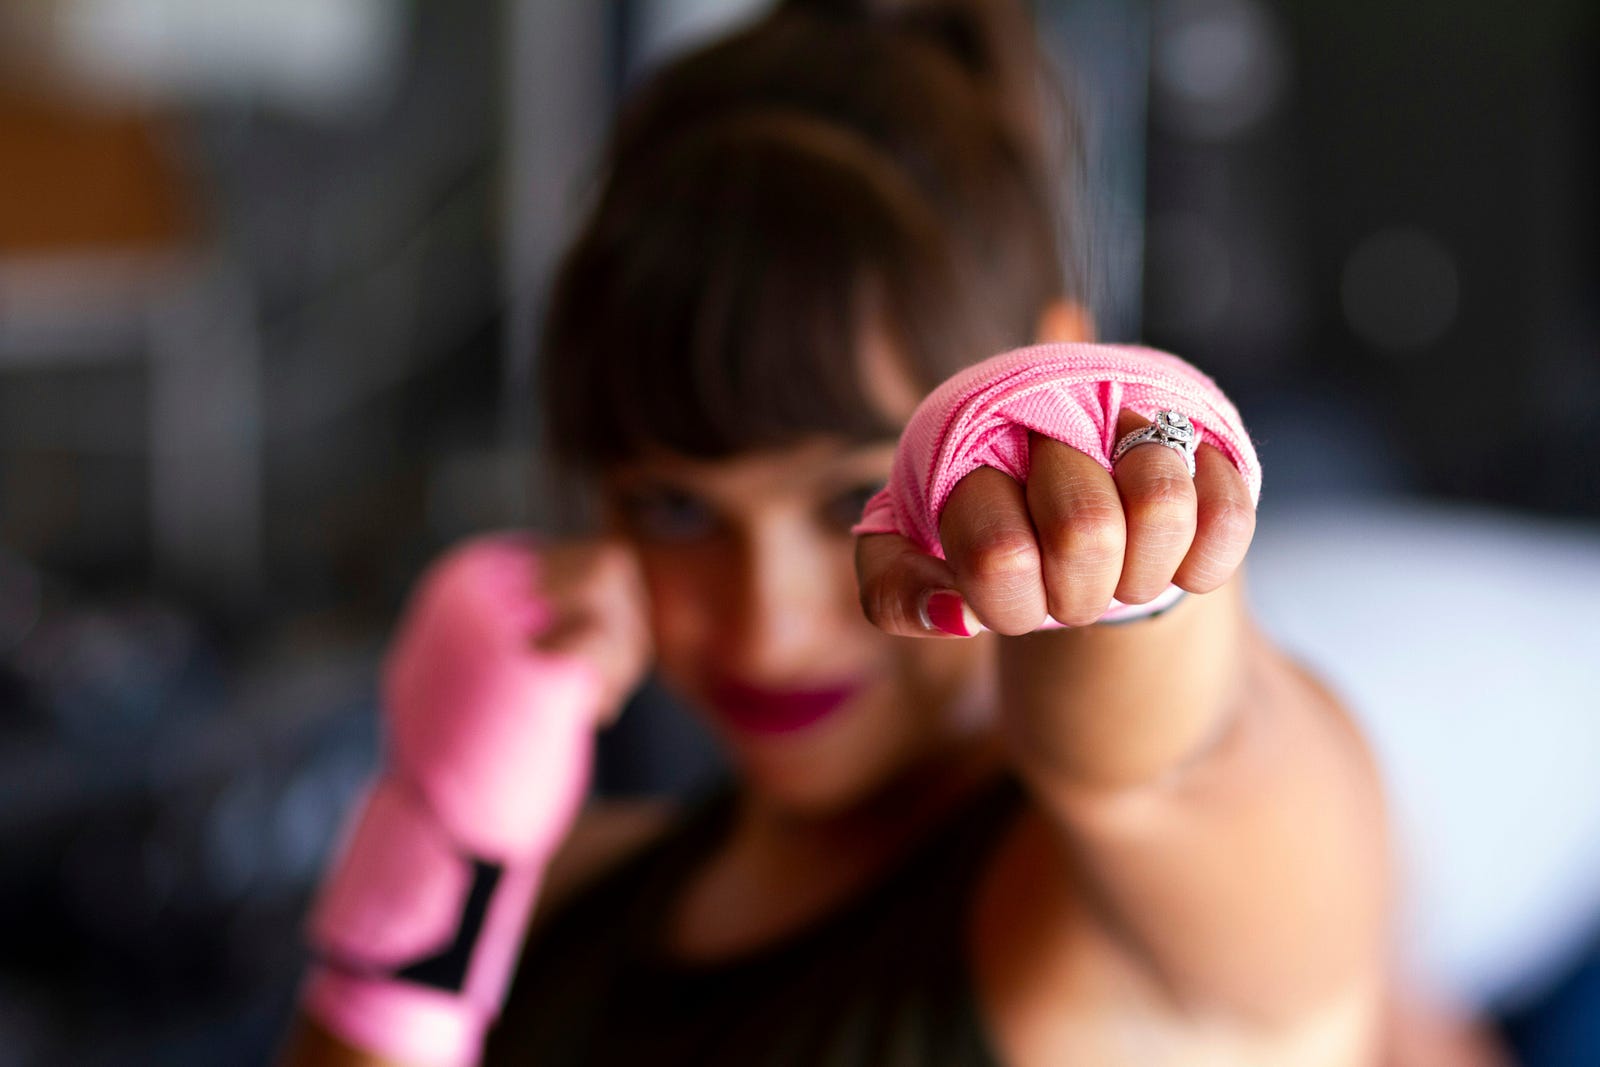 A young woman in pink fighting gloves punches her left arm forward.